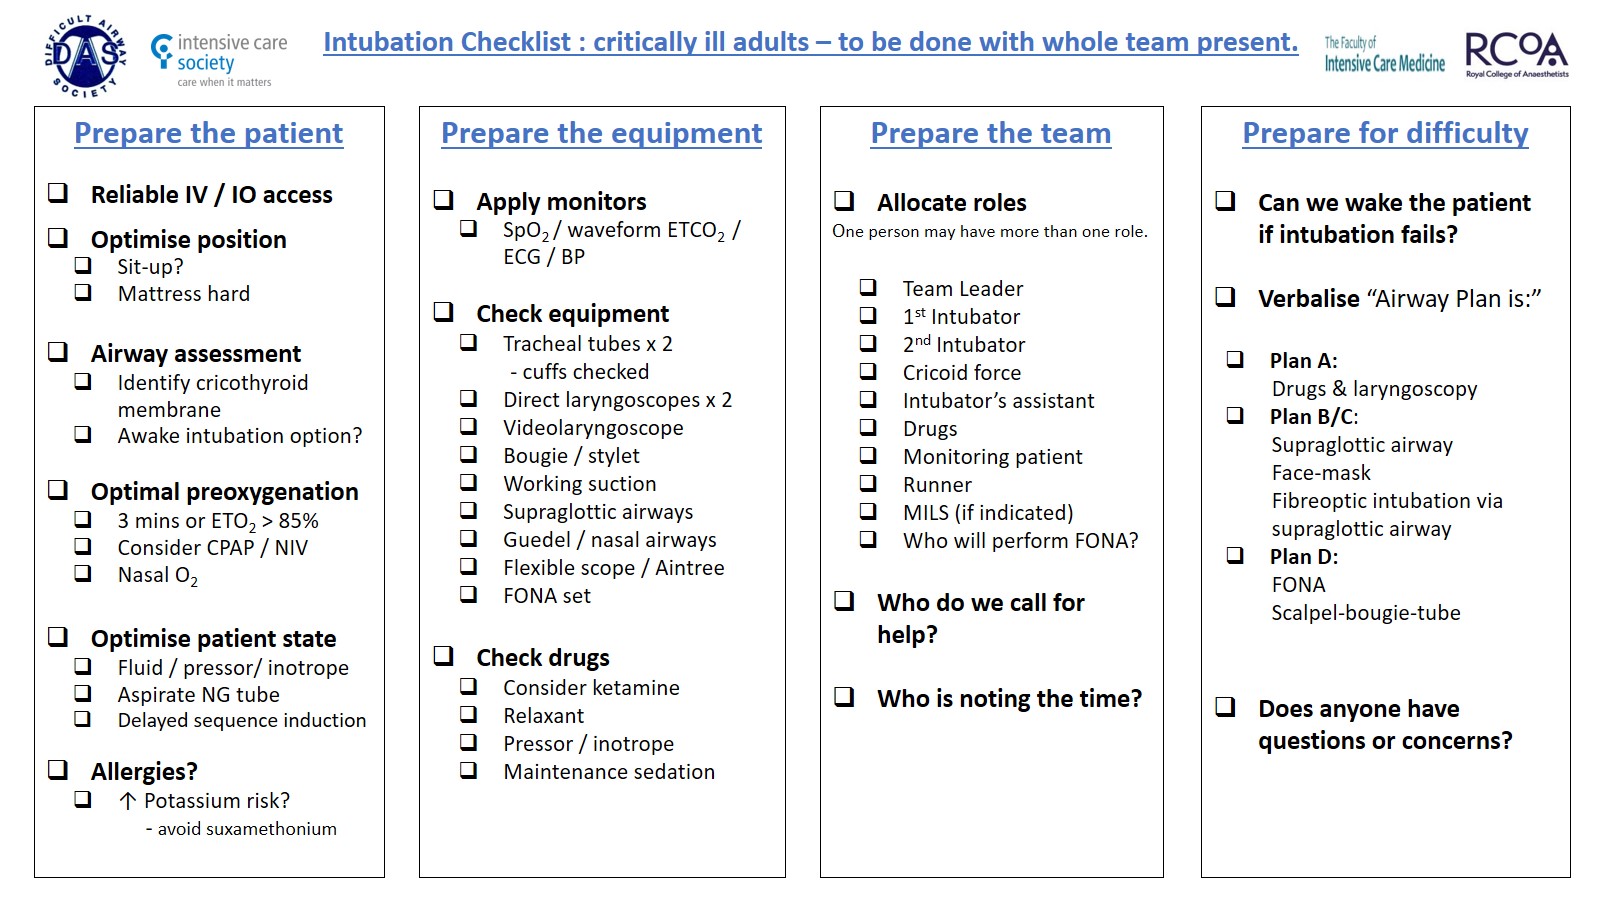 DAS guidelines for management of tracheal intubation in critically ill adults - Checklist